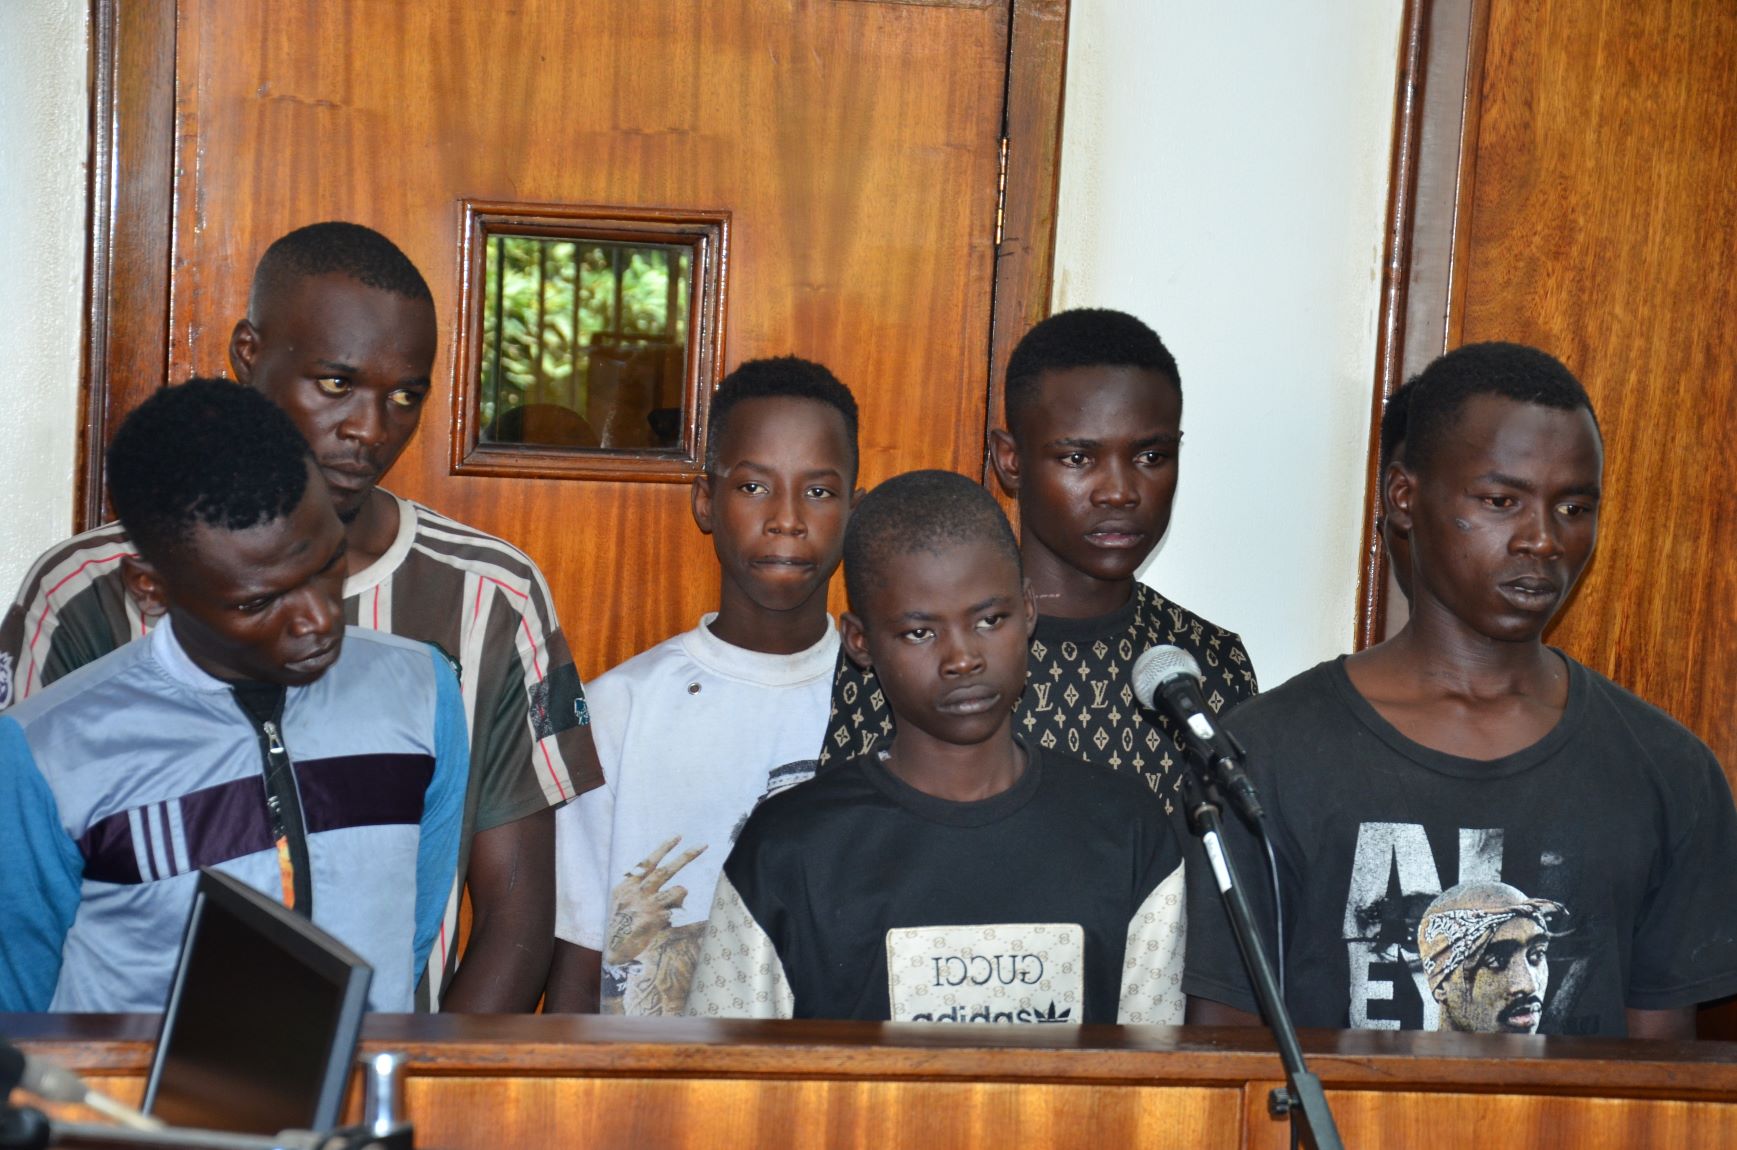 Kungfu assailants charged, remanded to Luzira